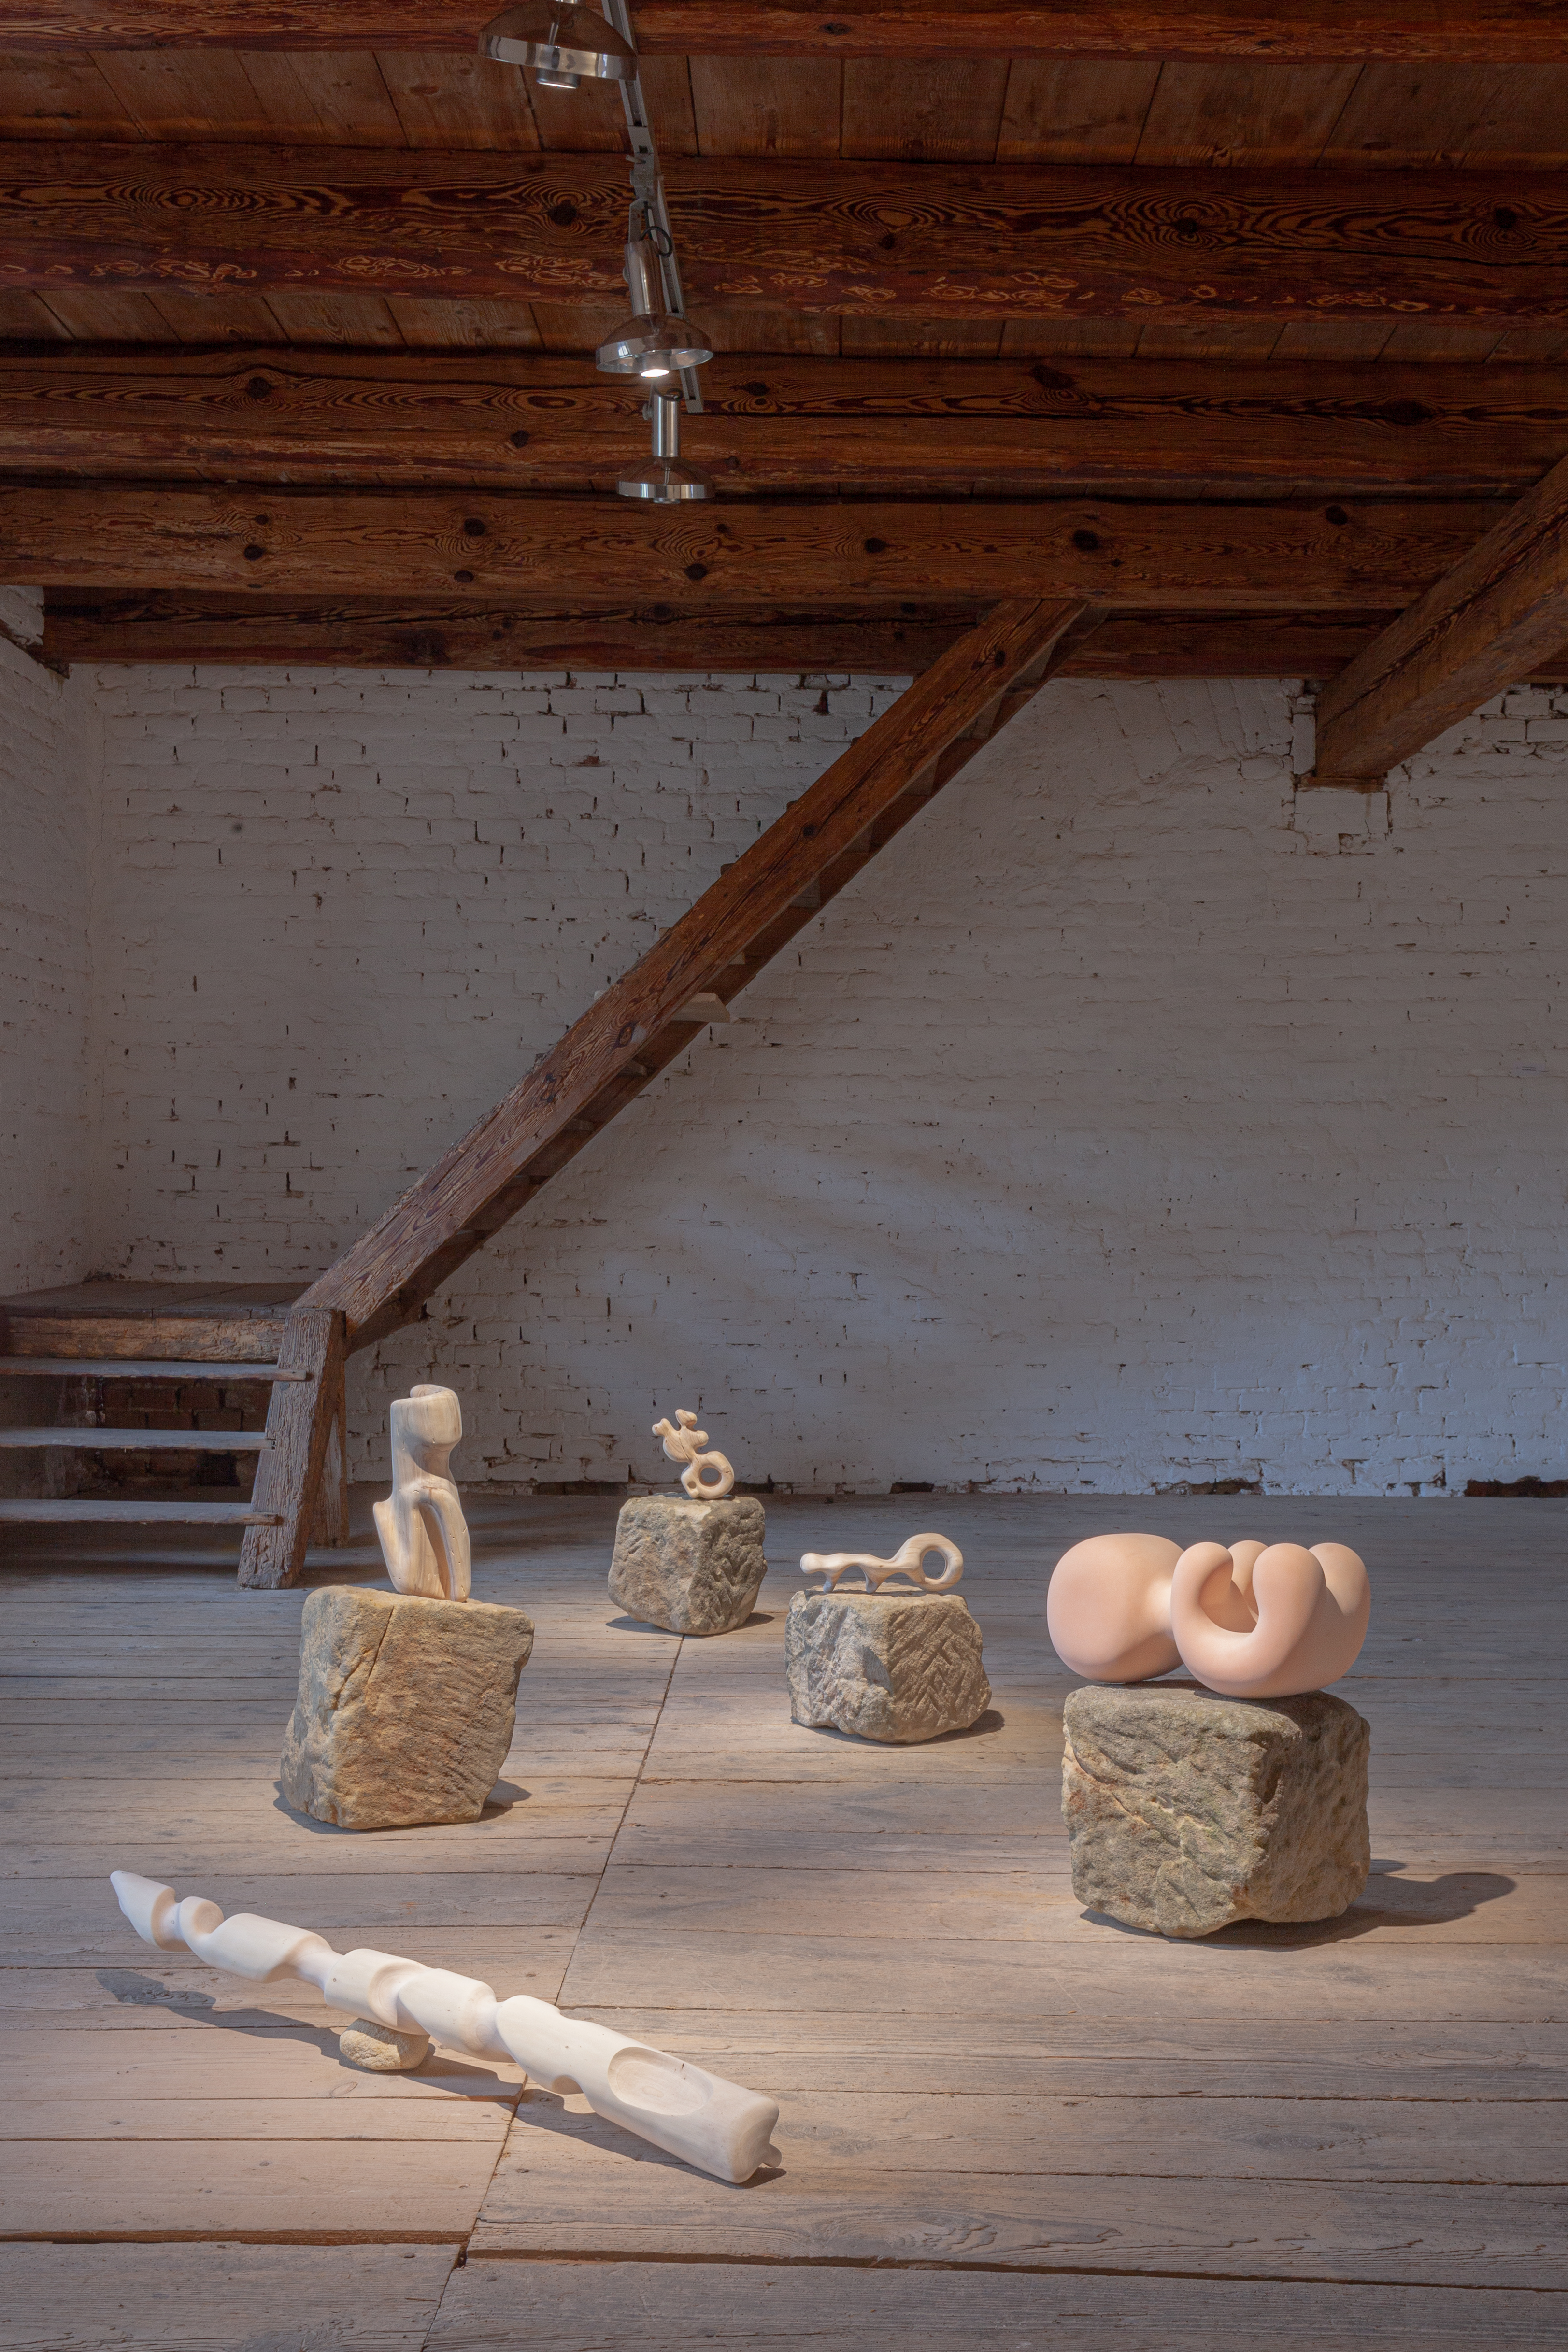 Photo of an art installation called Hands (and Other Products of Labor) 2.0 by Klára Čermáková (Farmstudio Open, Bohemia Farmstudio, Vysoká, Czechia) [Front view]. Five middle-size sculptures/objects of organic shapes (polyurethane foam, willow wood) lie on smaller sandstone pedestals in harmonic composition inside the gallery (originally a medieval barn).